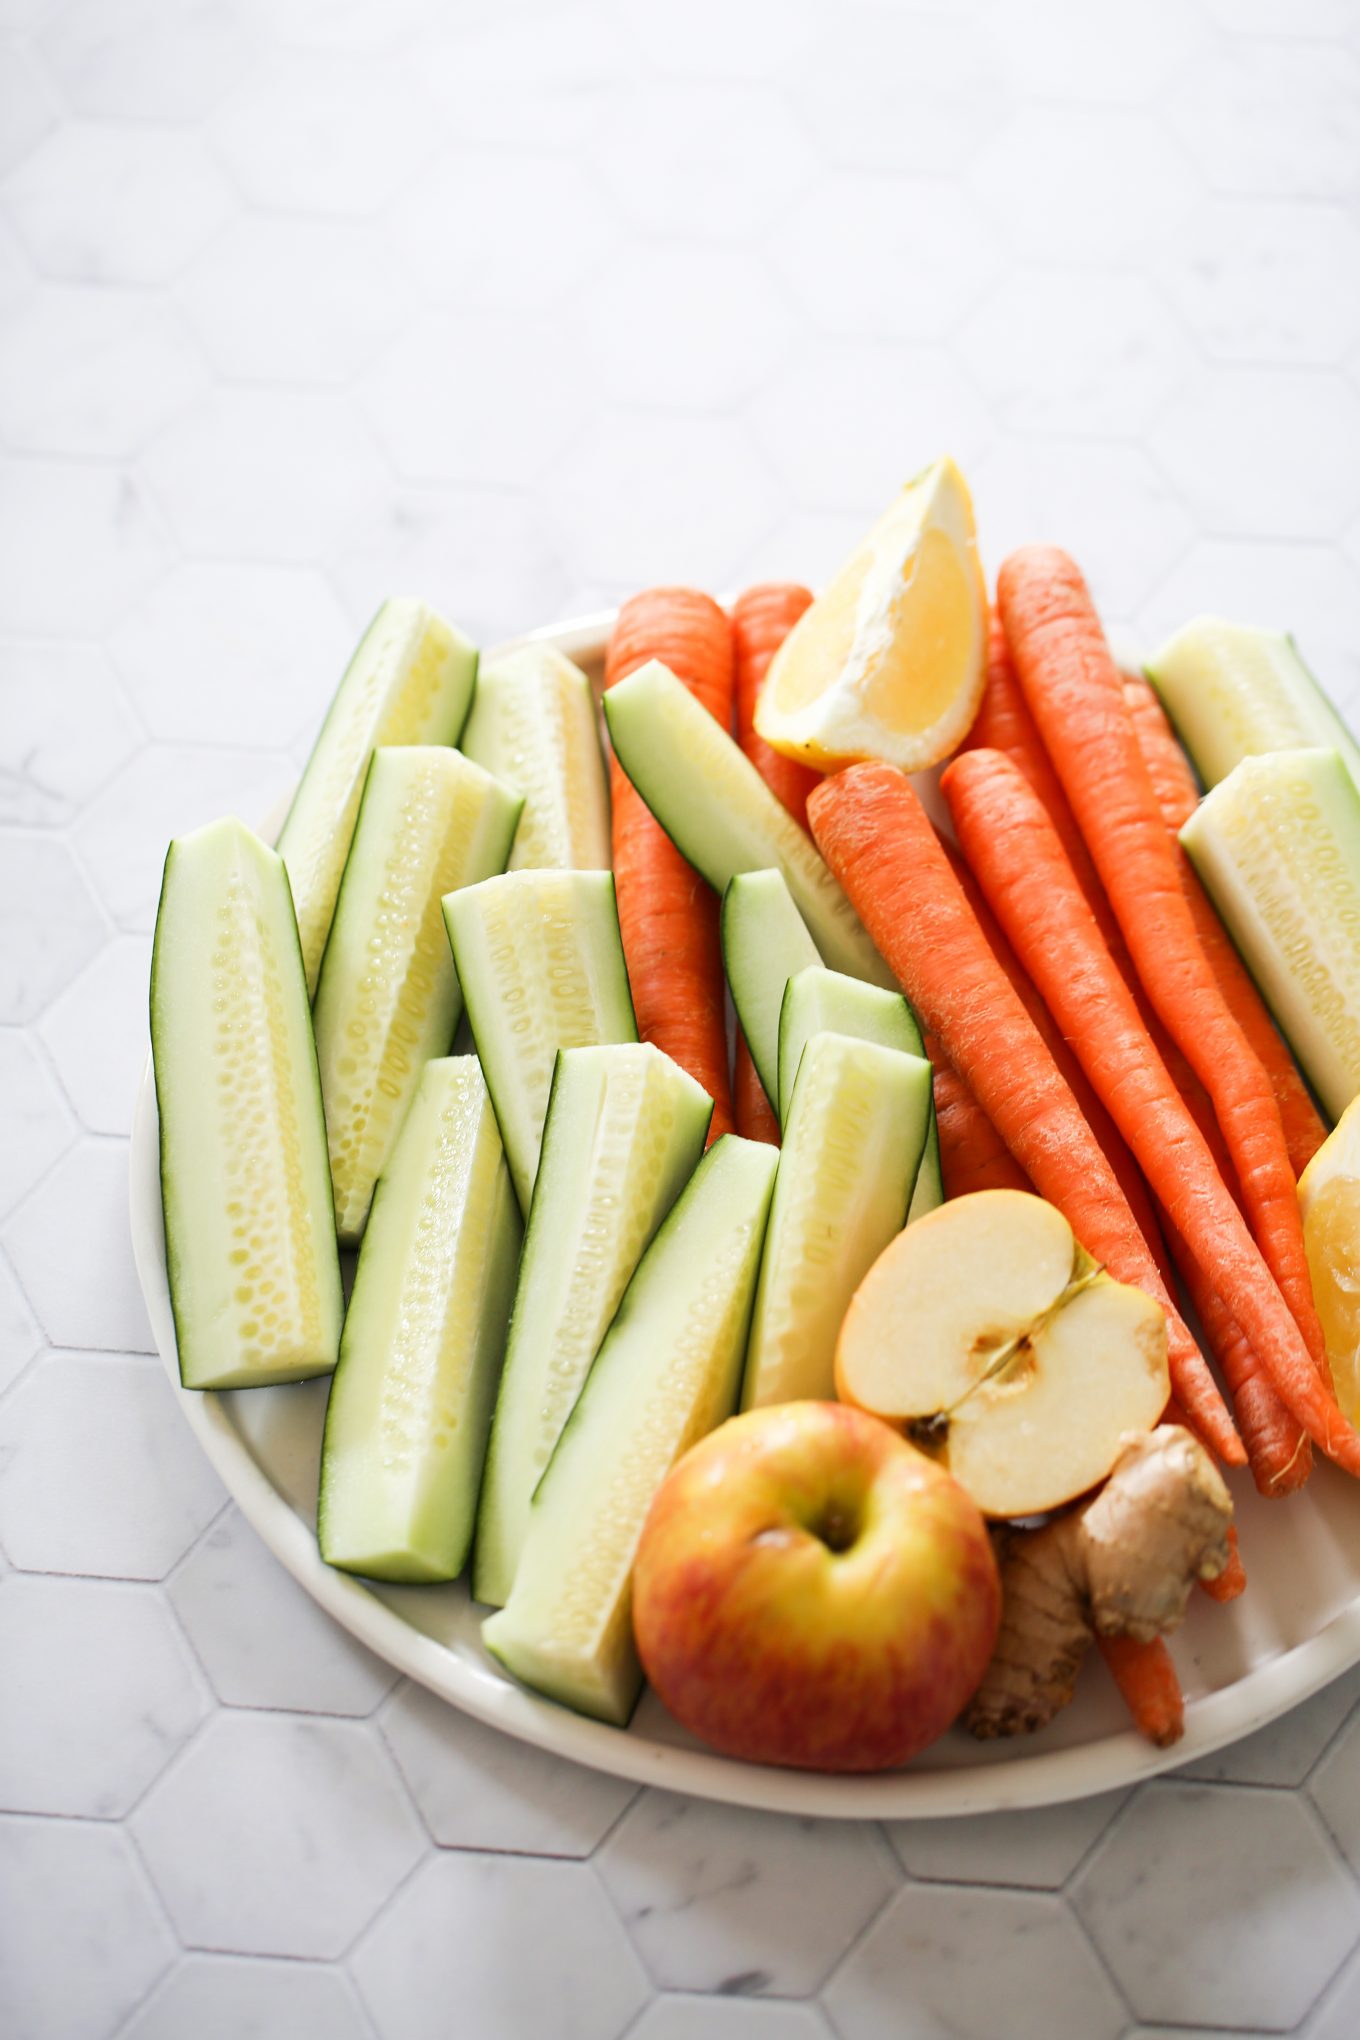 cucumber, apples, ginger, carrots and limes all sliced and ready to make juice.